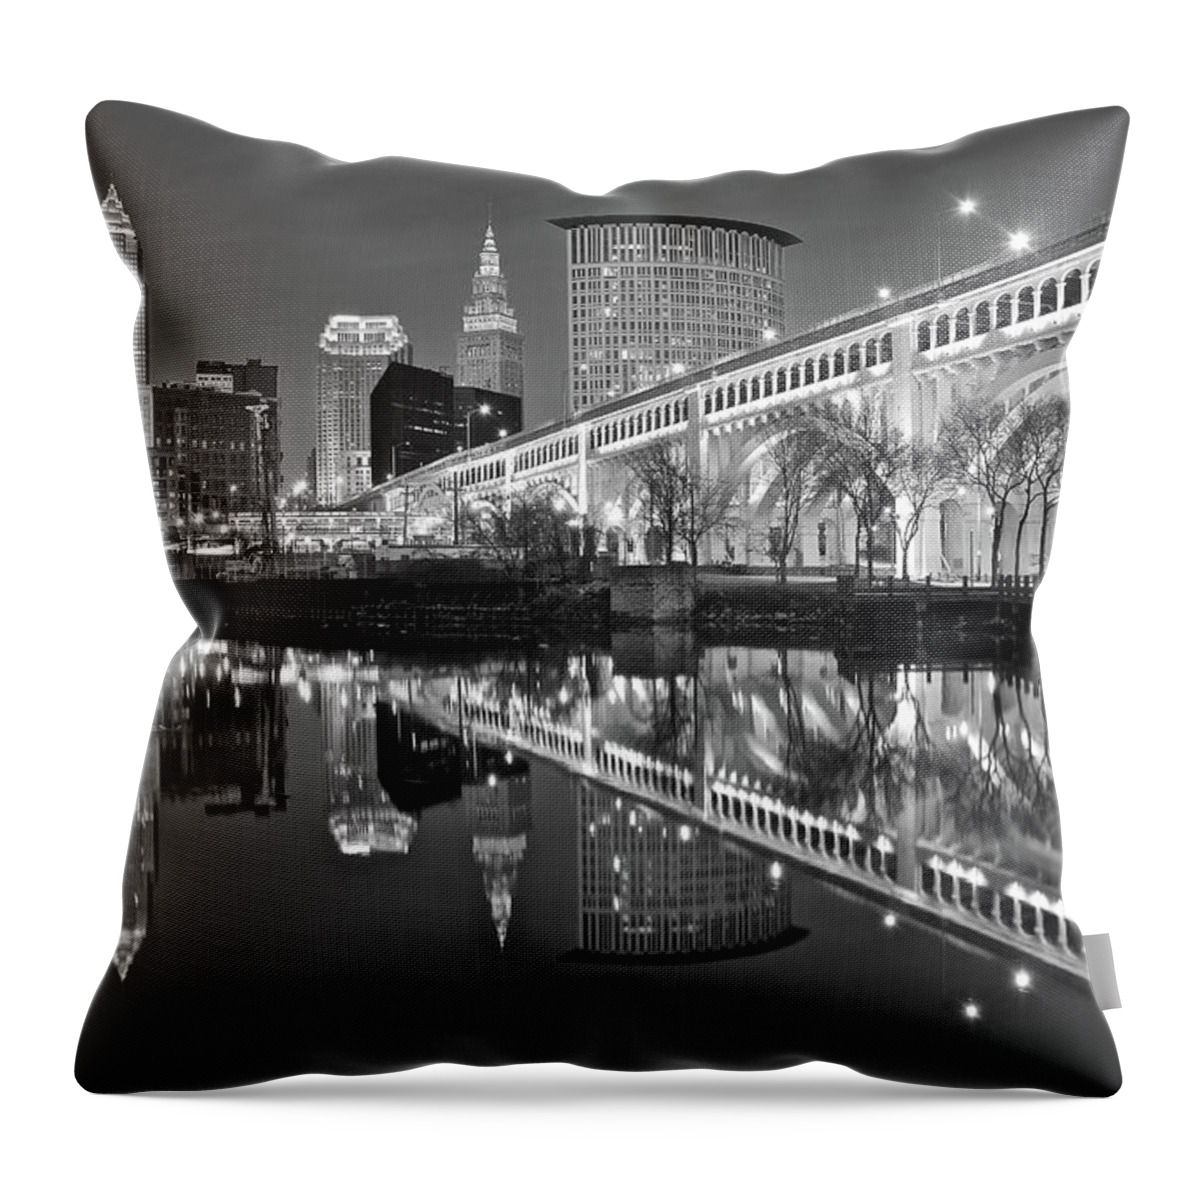 Cleveland Throw Pillow featuring the photograph Monochrome Reflection by Frozen in Time Fine Art Photography